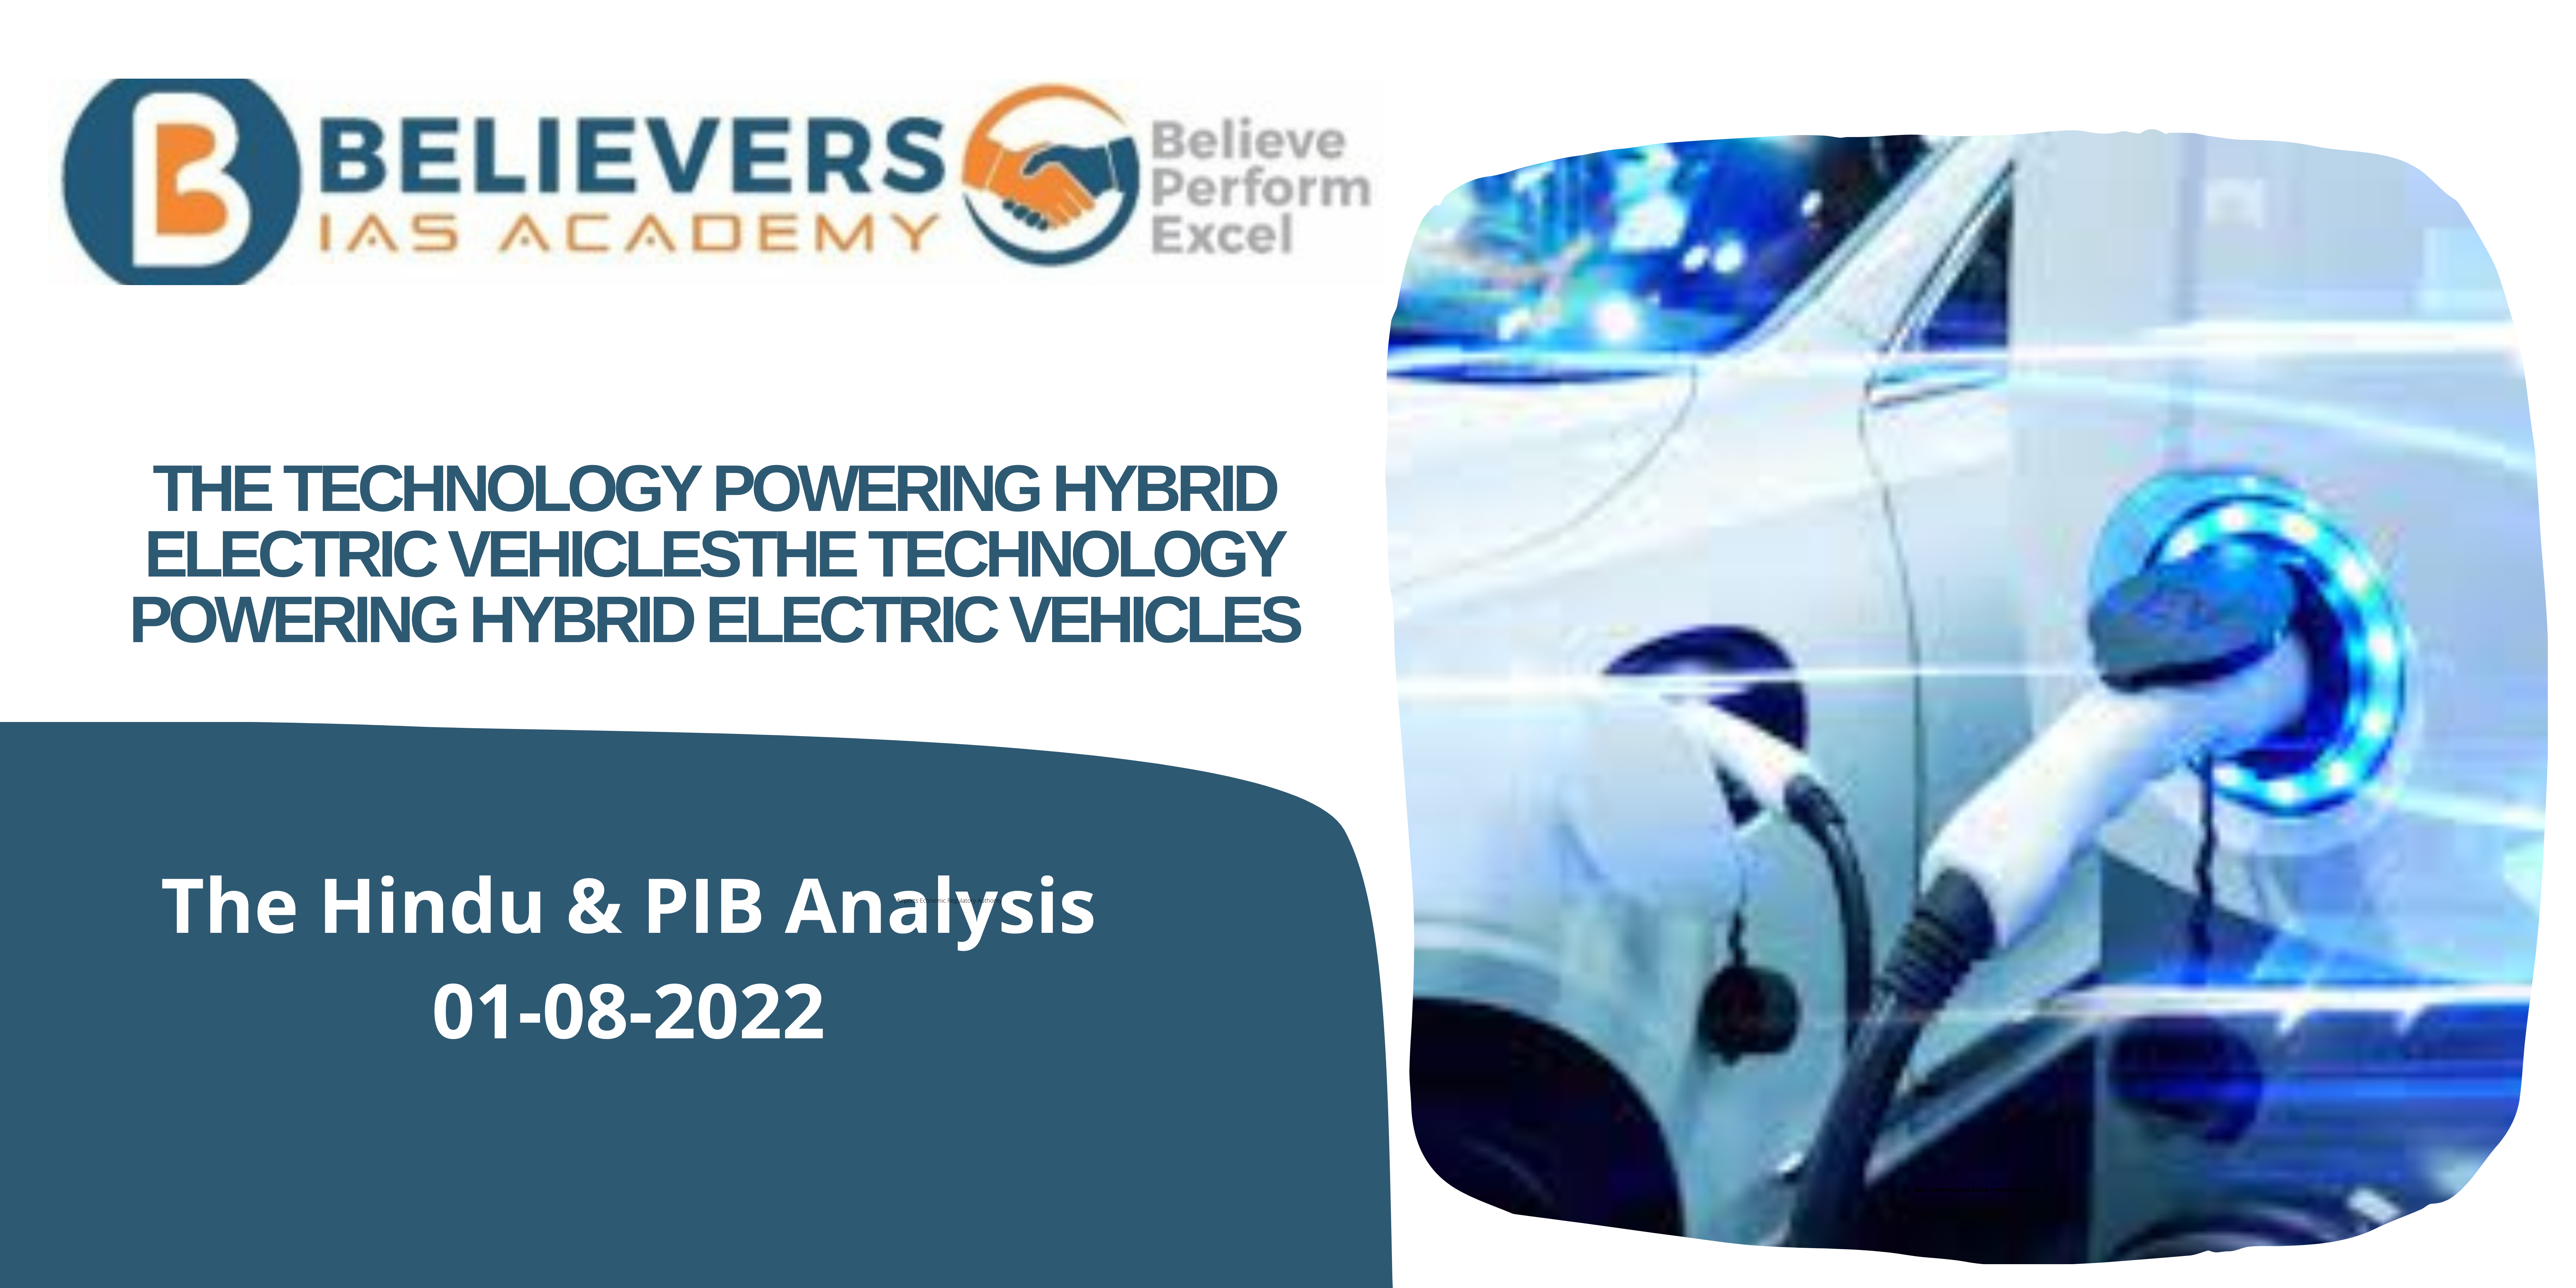 IAS Current affairs - The Technology Powering Hybrid Electric Vehicles